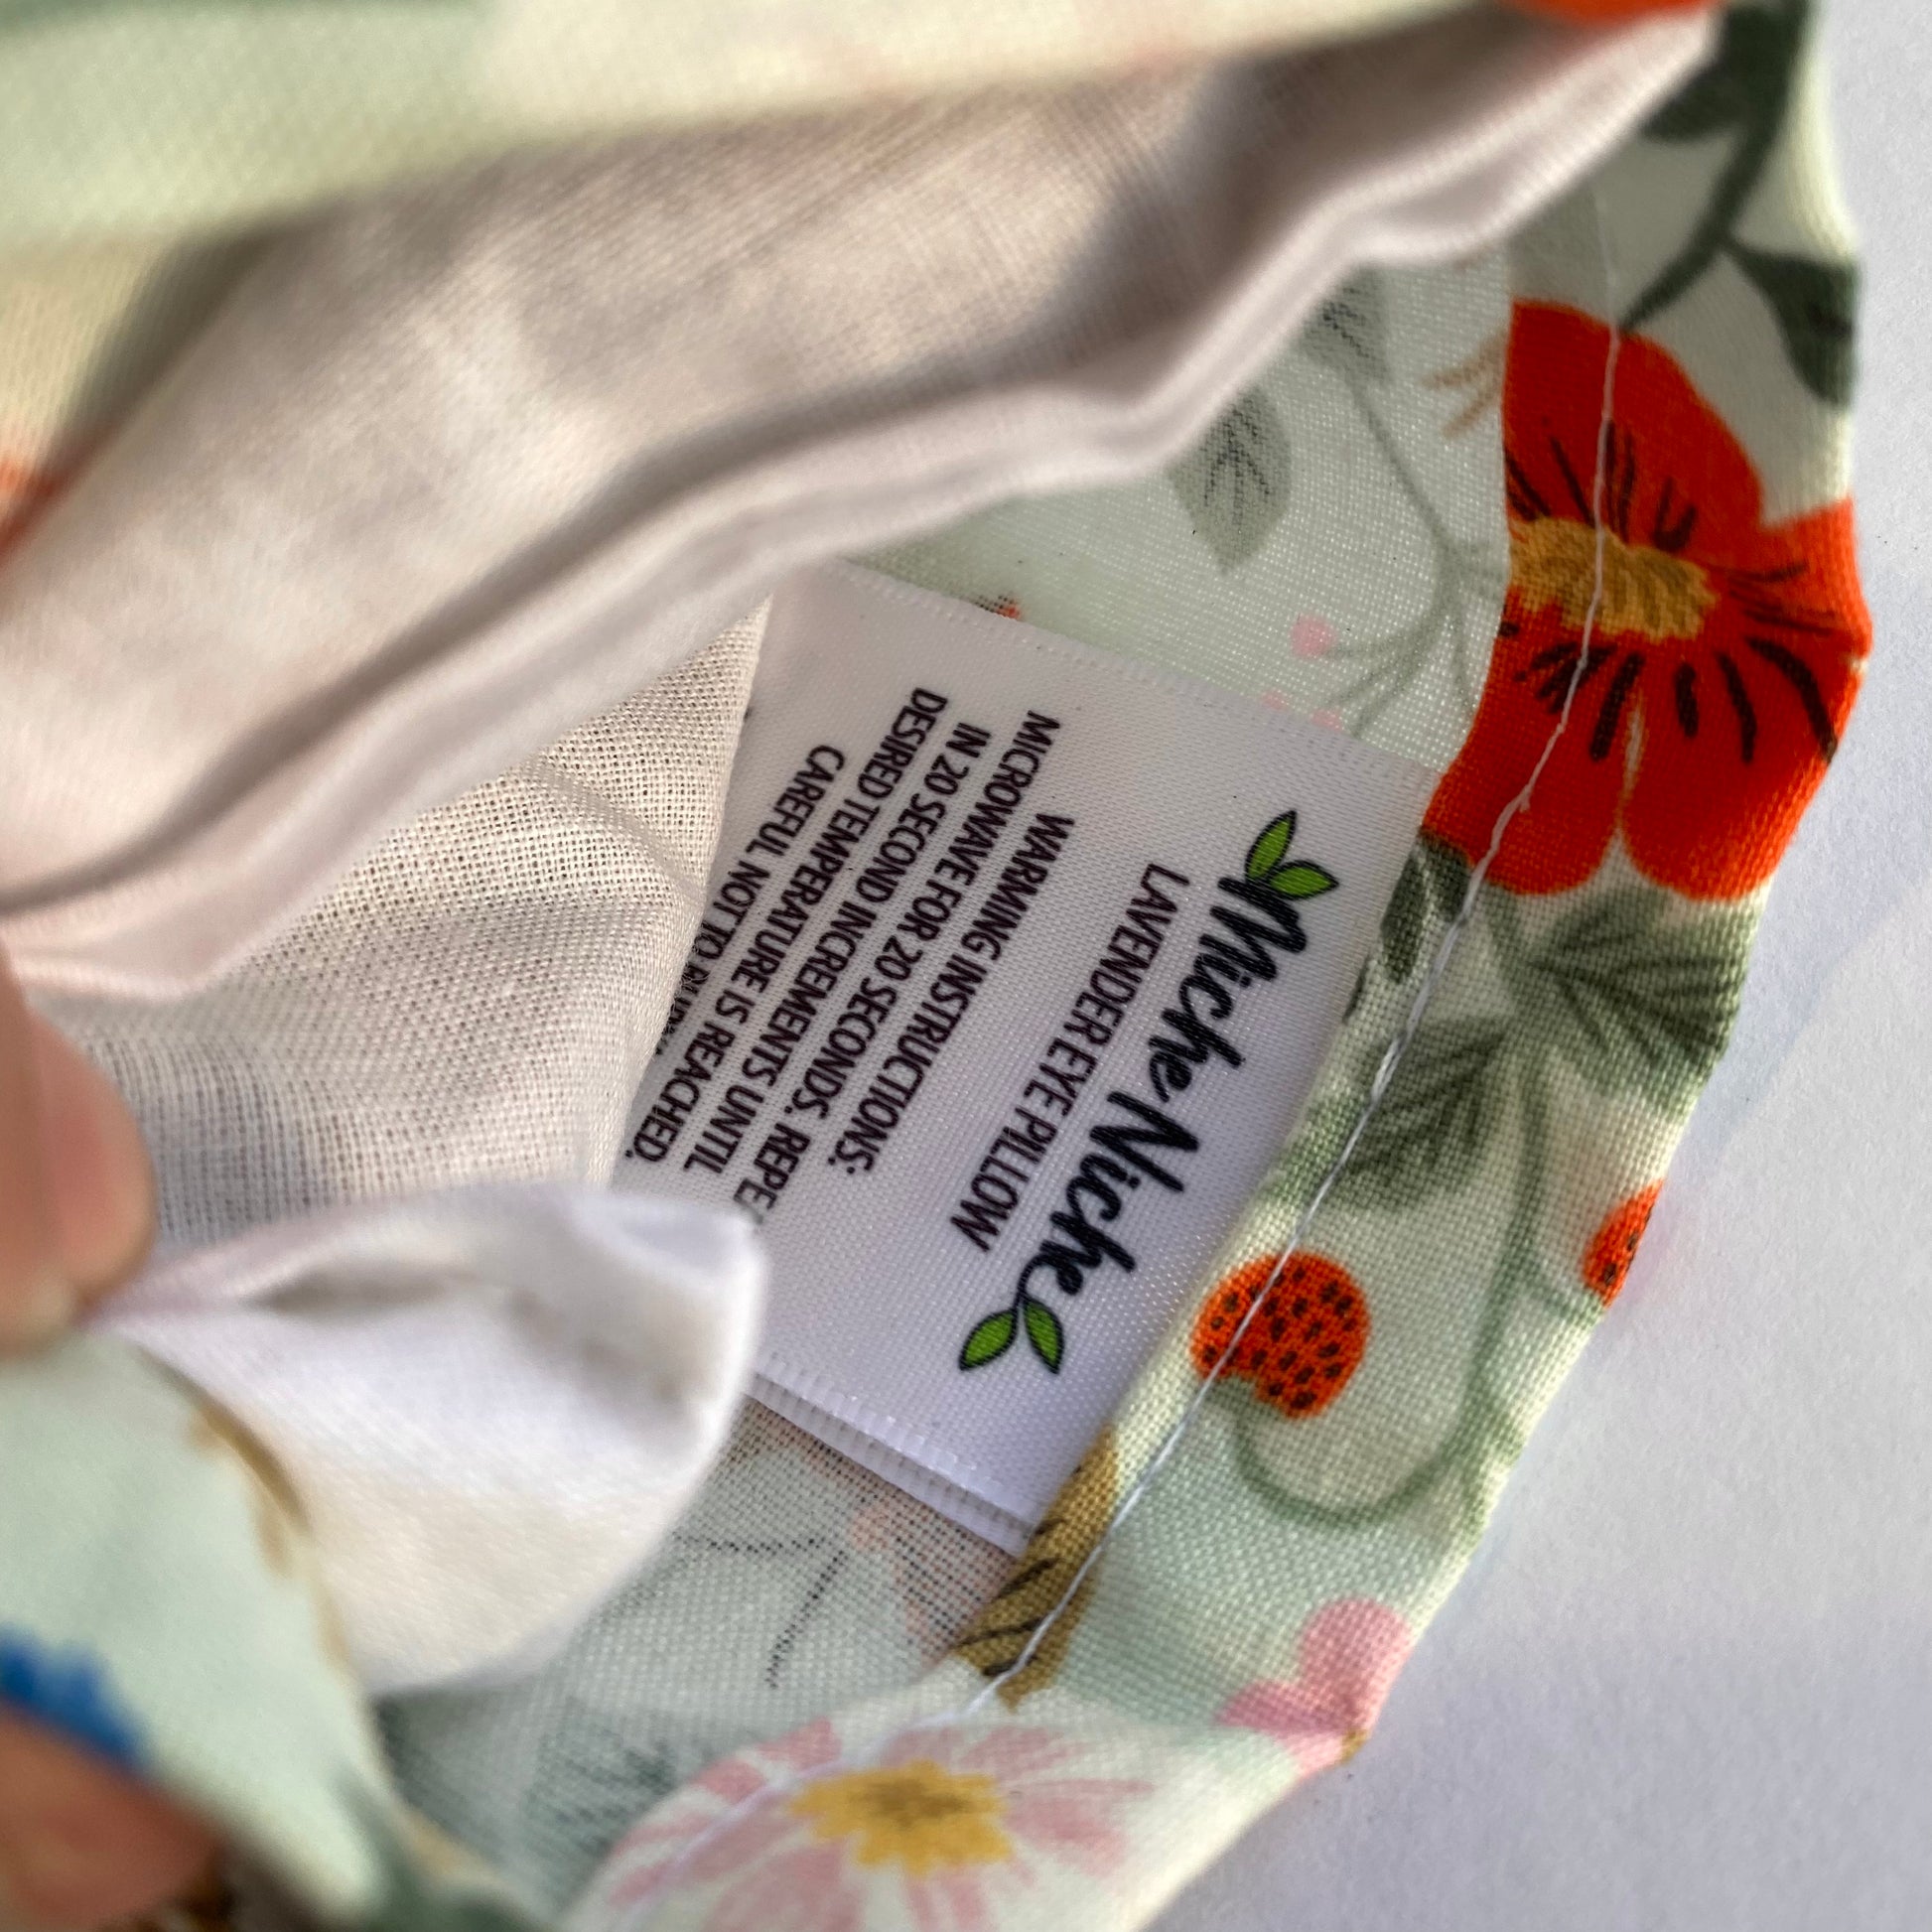 Eye pillow cover comes with sewn in tag with heating and cooling instructions